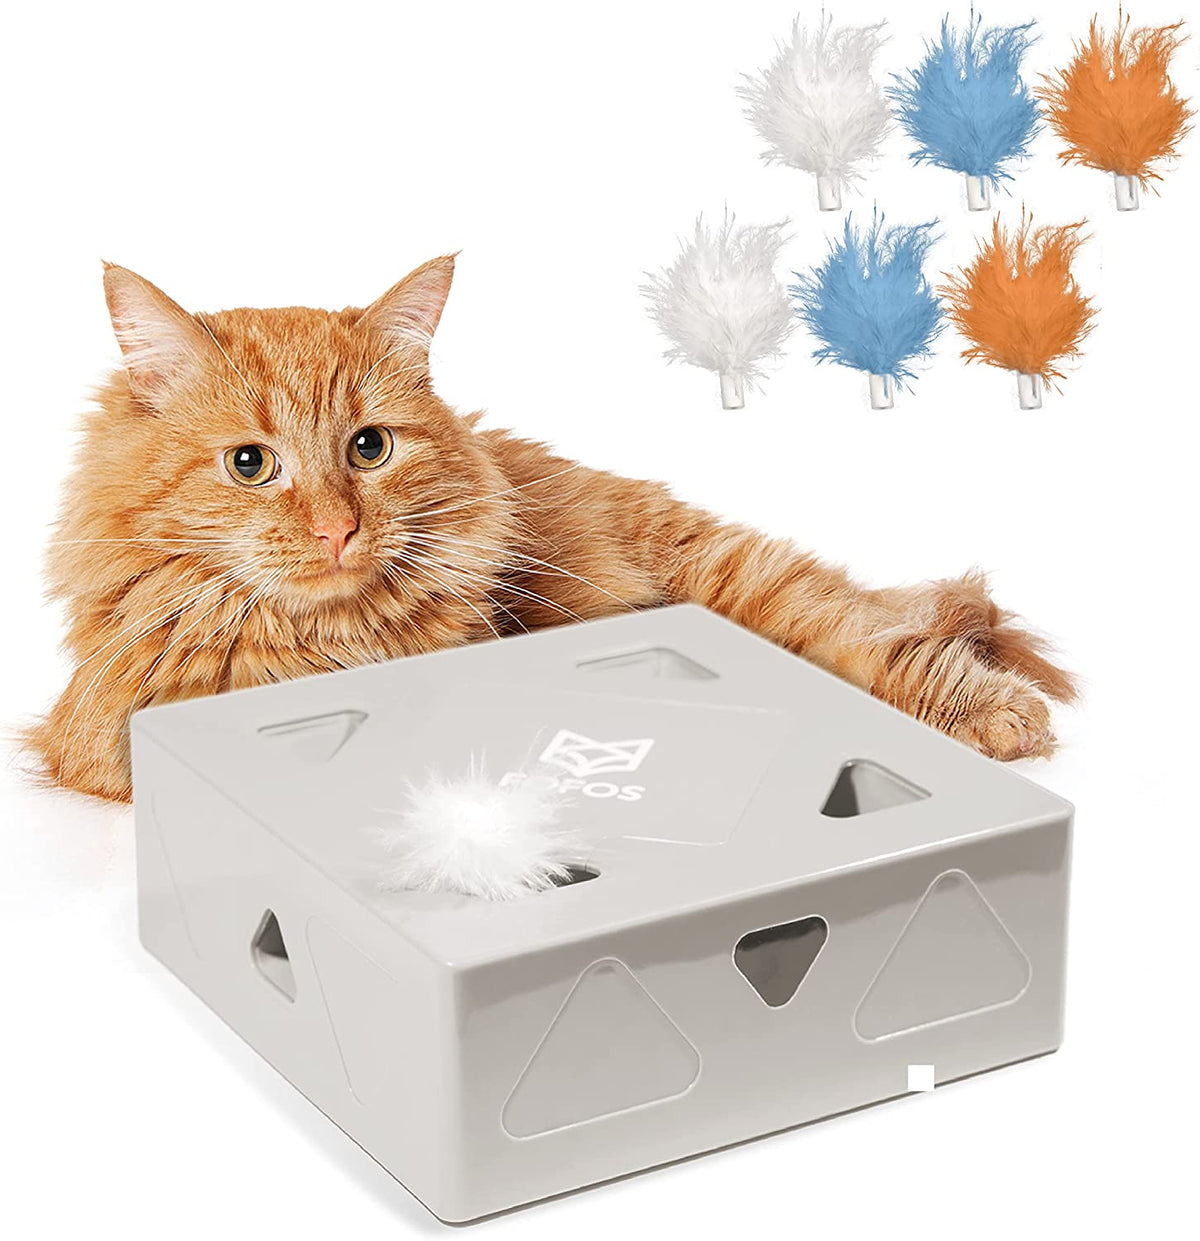 [FOFOS]-ErratiCat Interactive PIR Toy-White USB Rechargeable